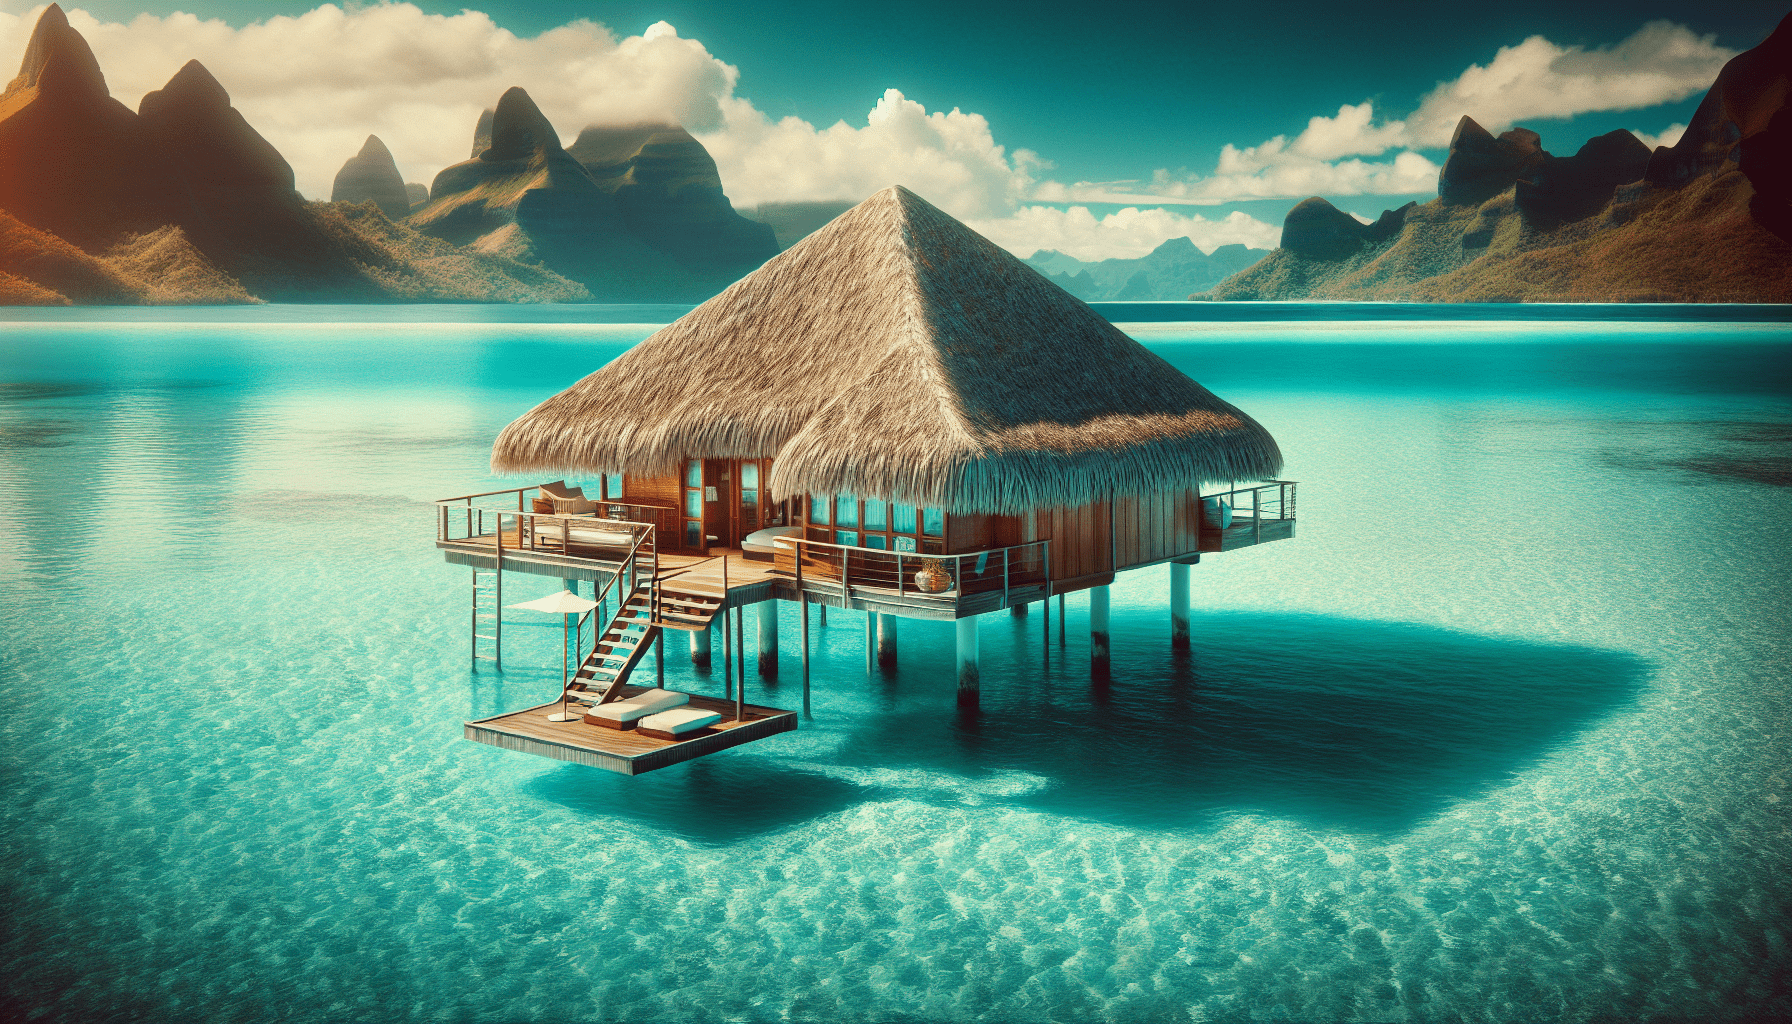 How Much Is It To Spend A Night In Bora Bora?